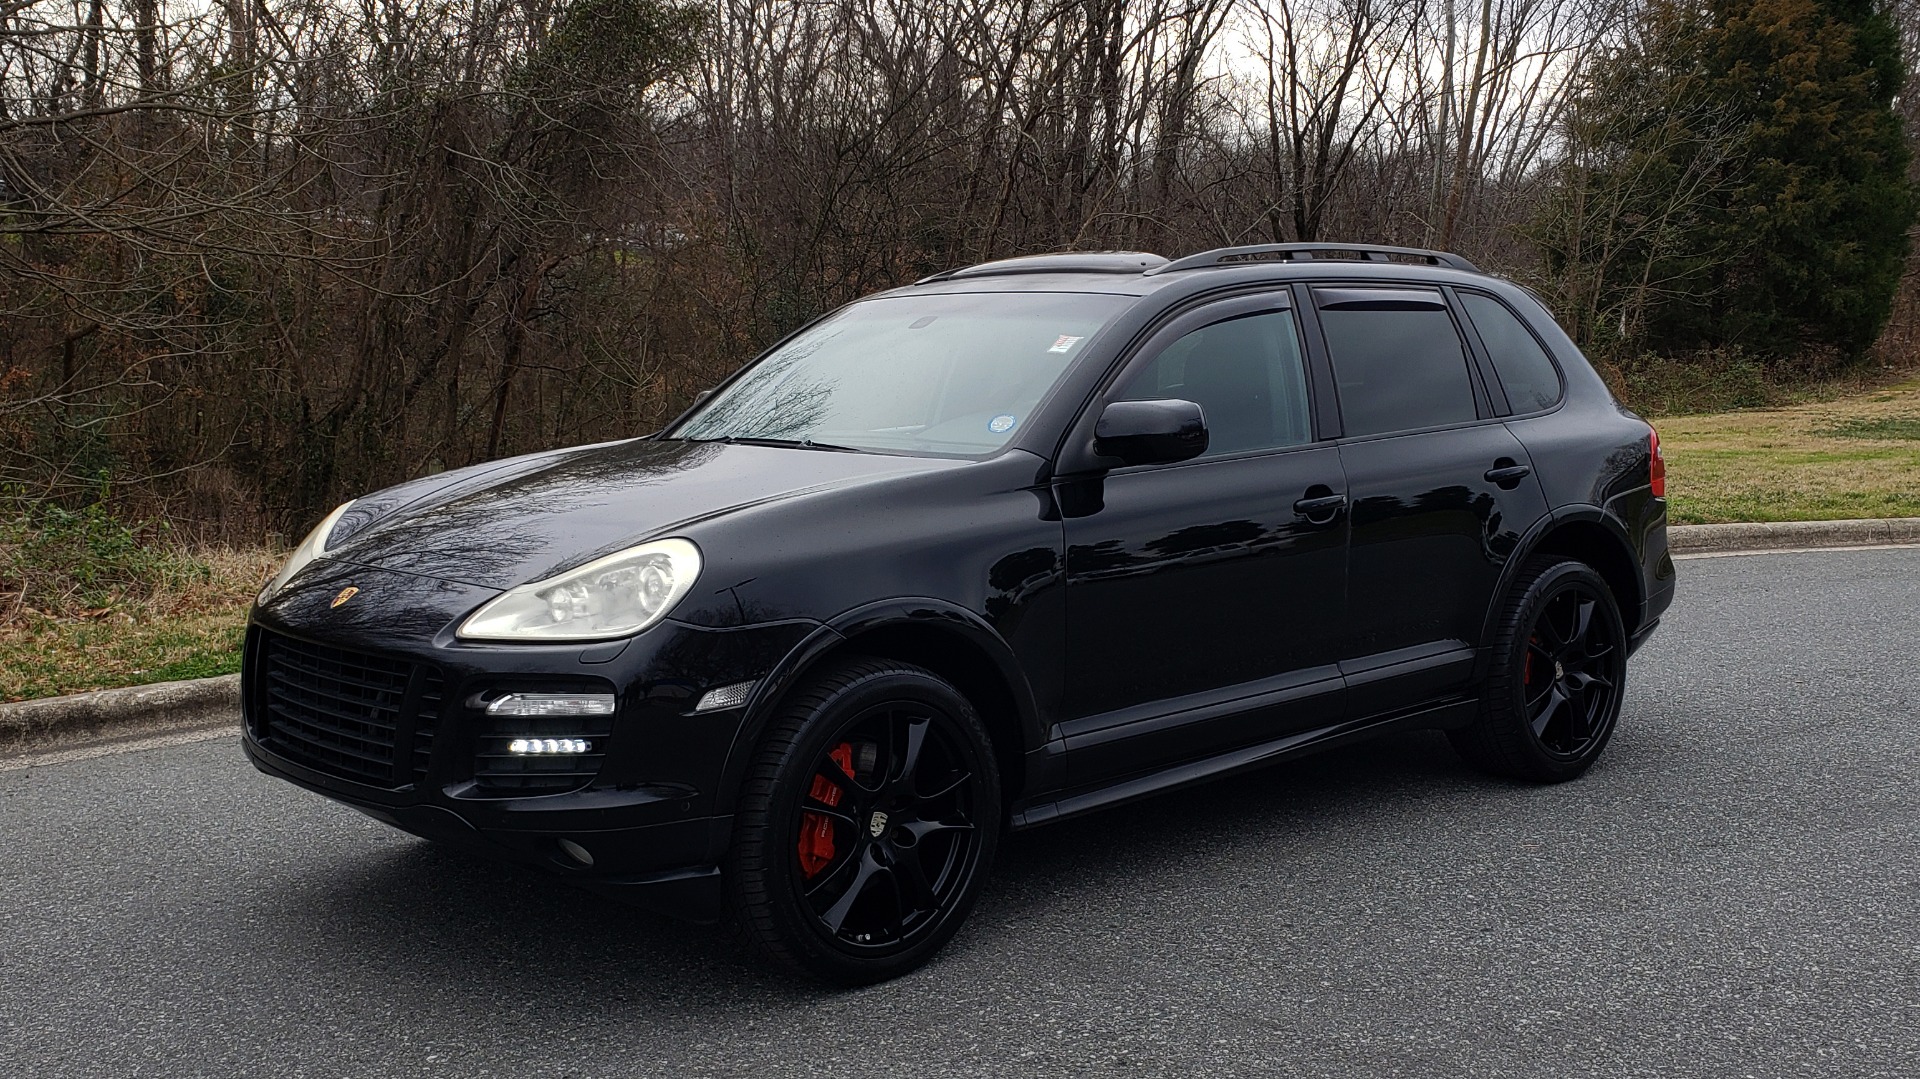 Used 2008 Porsche CAYENNE GTS TIPTRONIC / NAV / SUNROOF / REARVIEW / BOSE for sale Sold at Formula Imports in Charlotte NC 28227 1